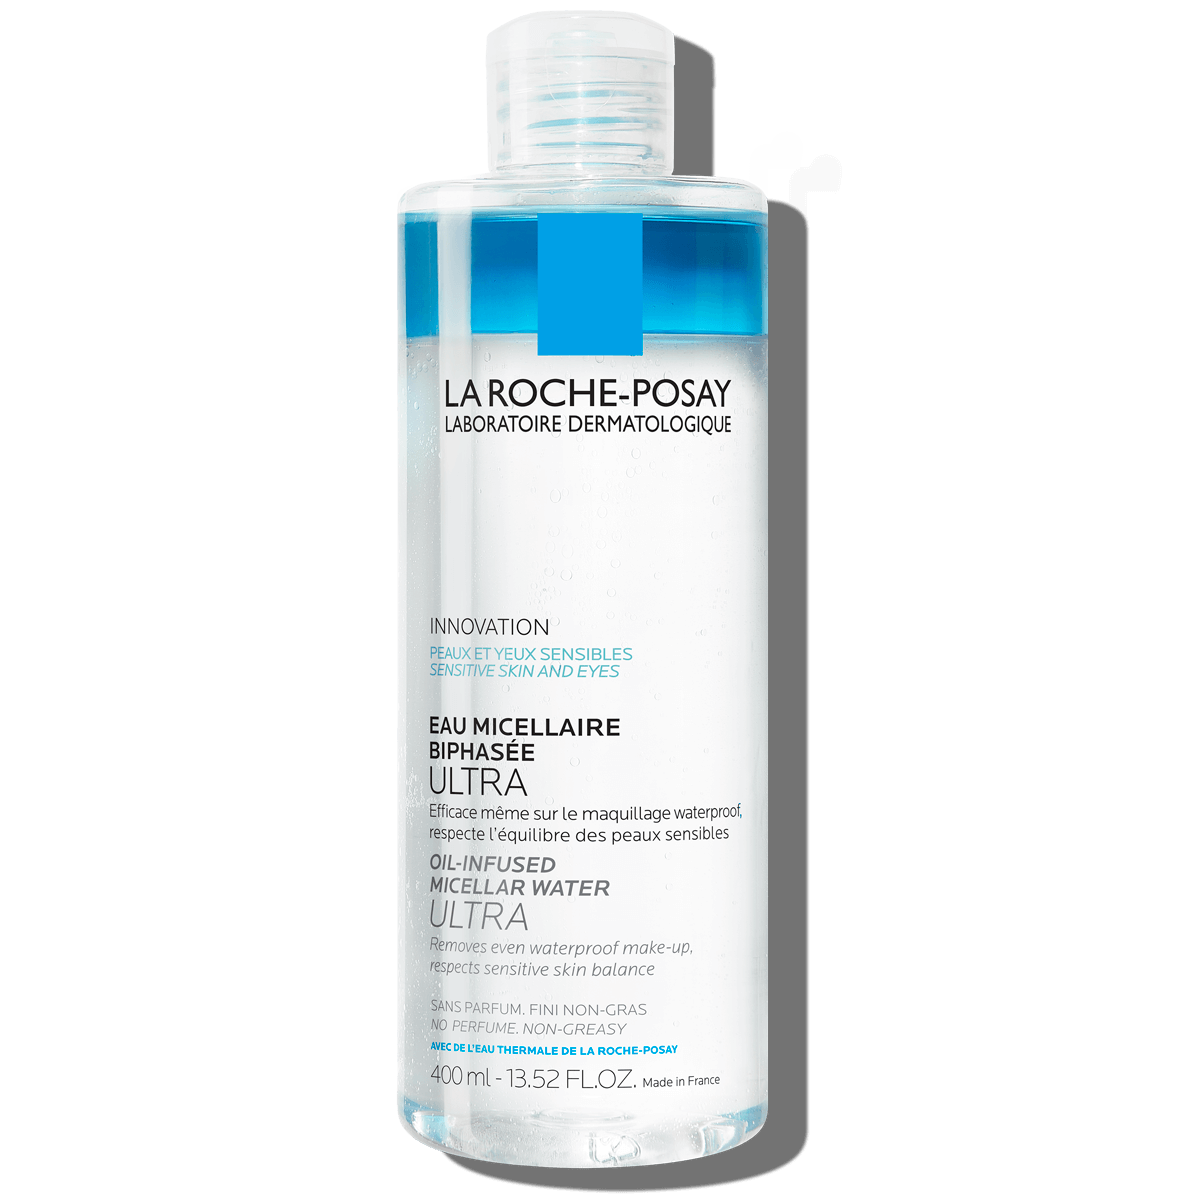 LaRochePosay-Product-Face-Physiological-Oil-Infused-Micellar-Water-Ultra-400ml-3337875725897-FSS